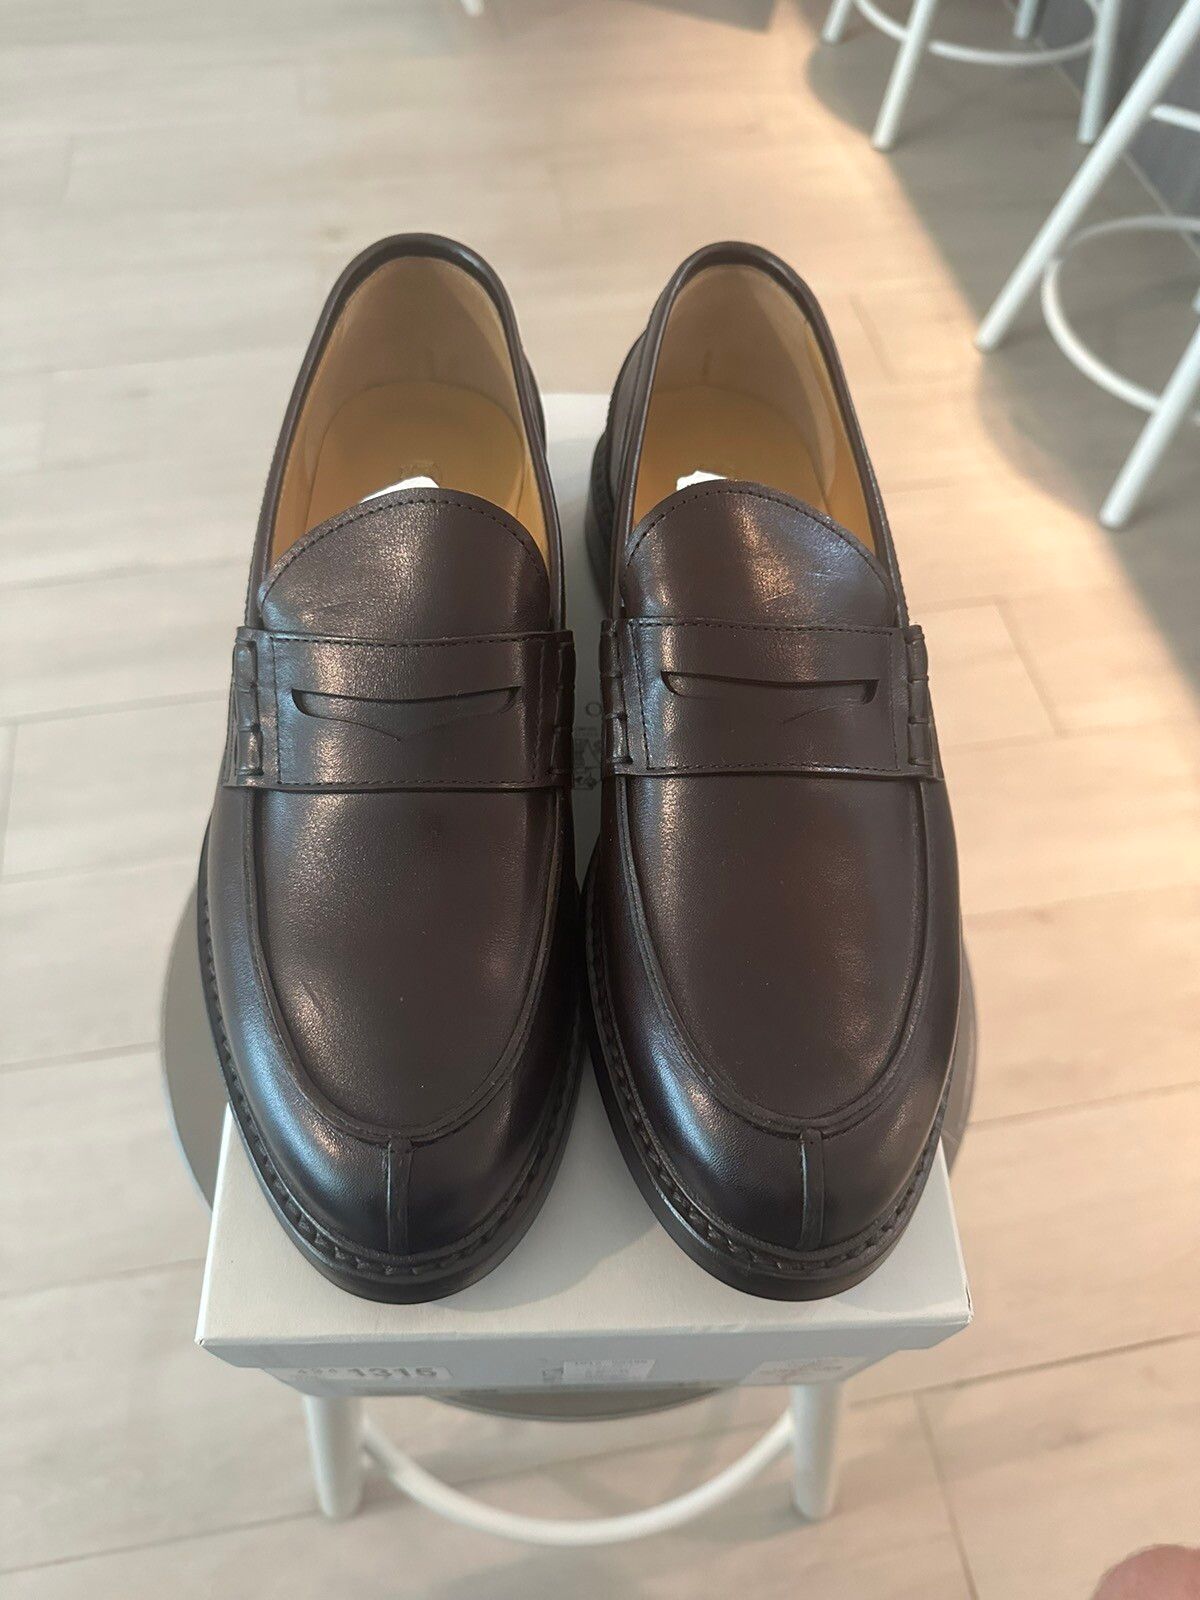 Brunello Cucinelli Leather Norwegian Toe Penny Loafers | Grailed